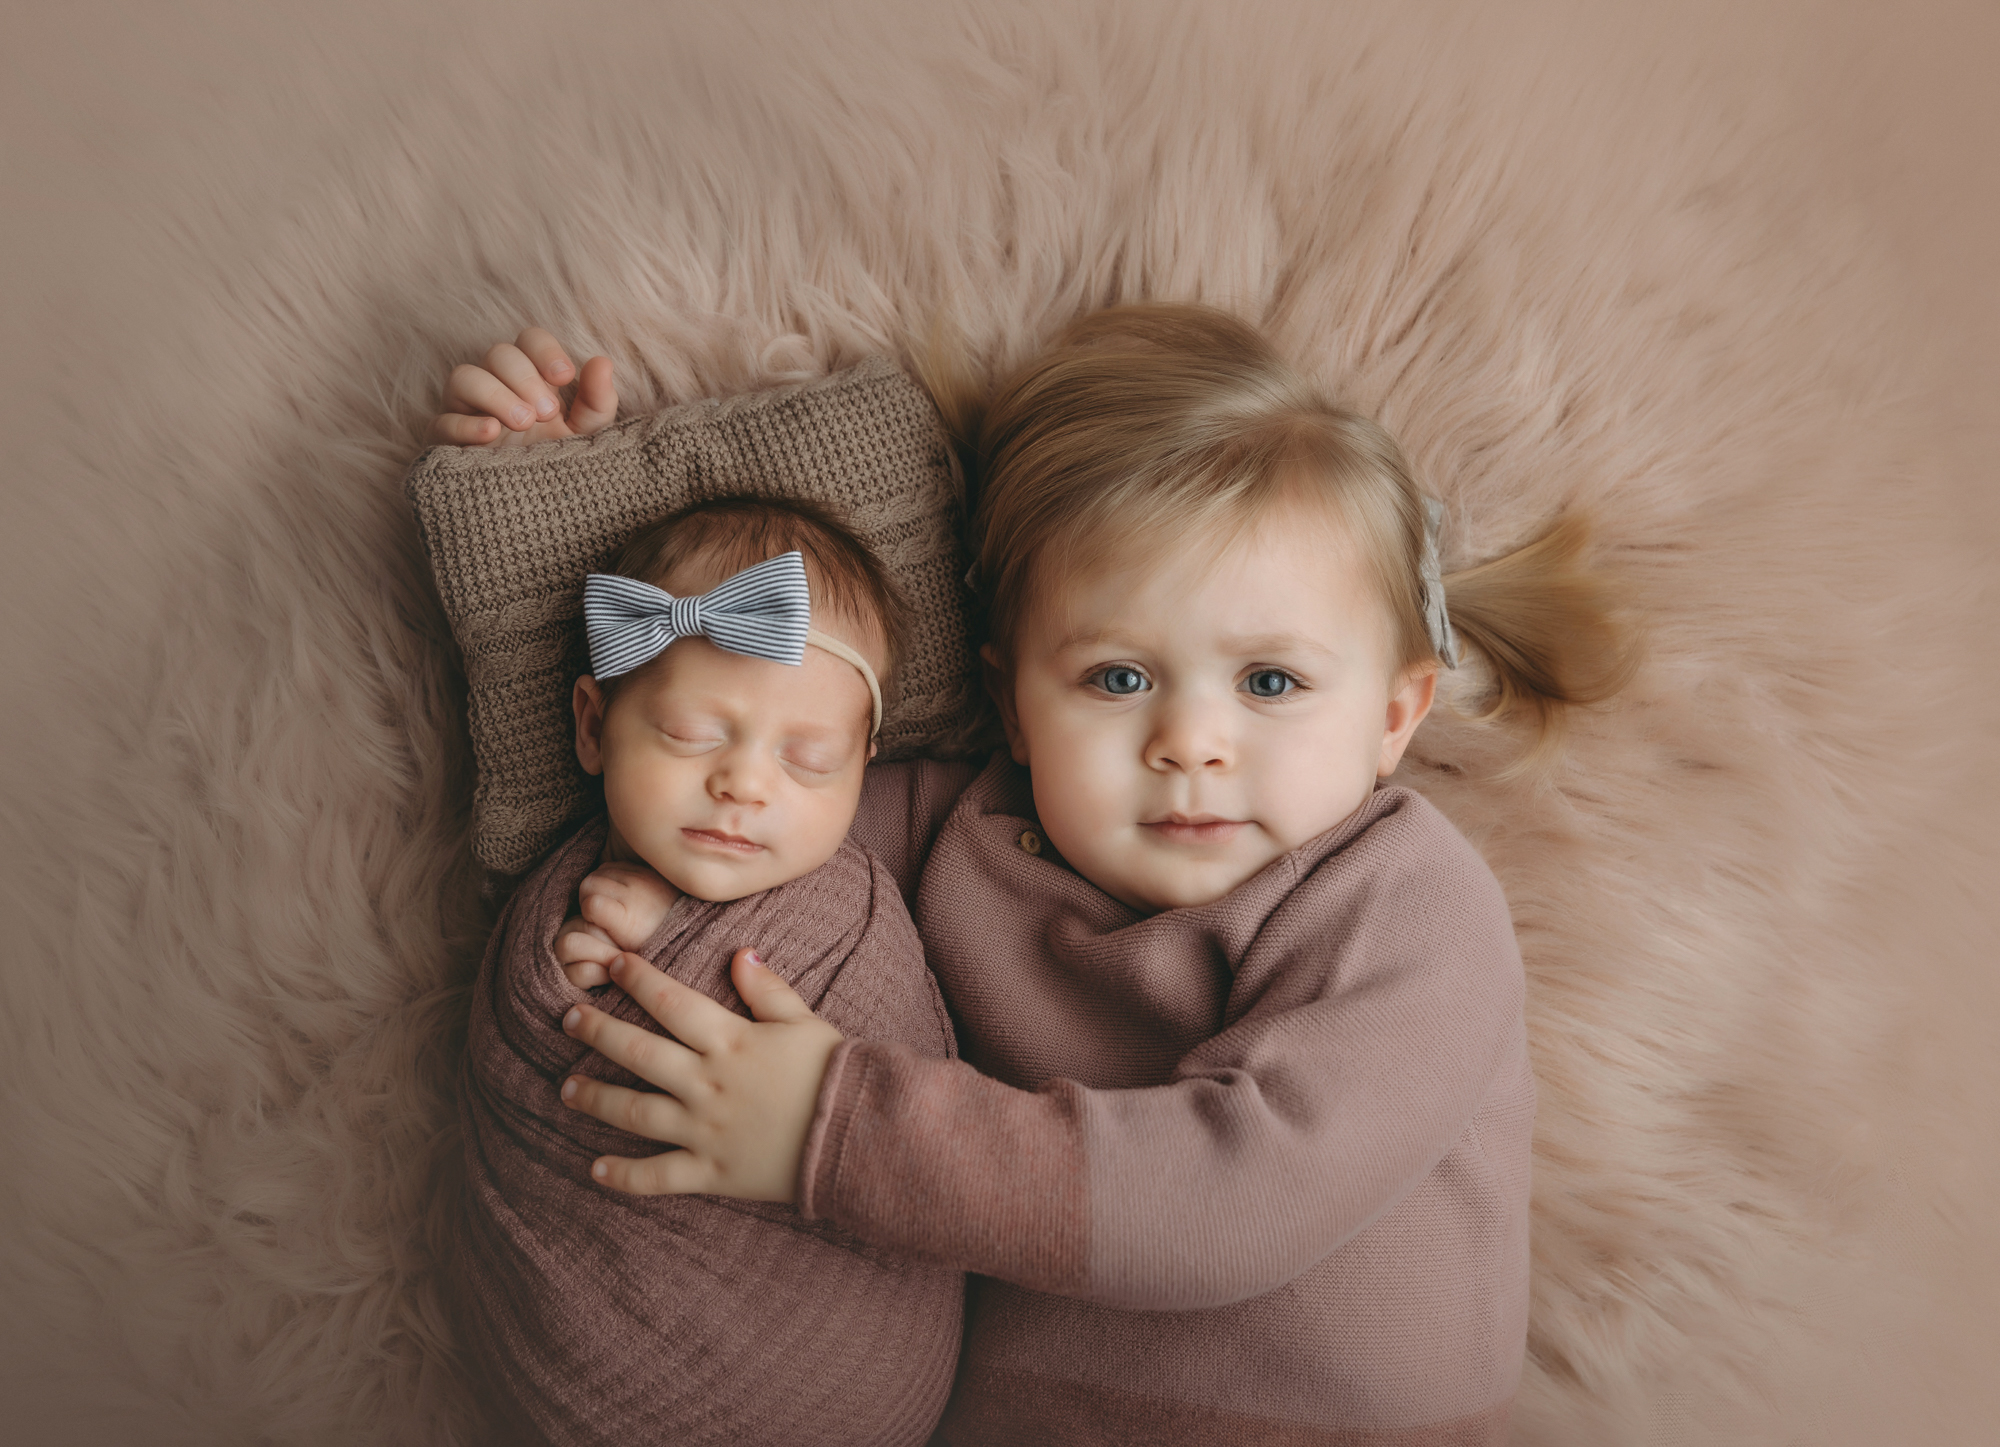 Sister and newborn portrait on furry pink blanket